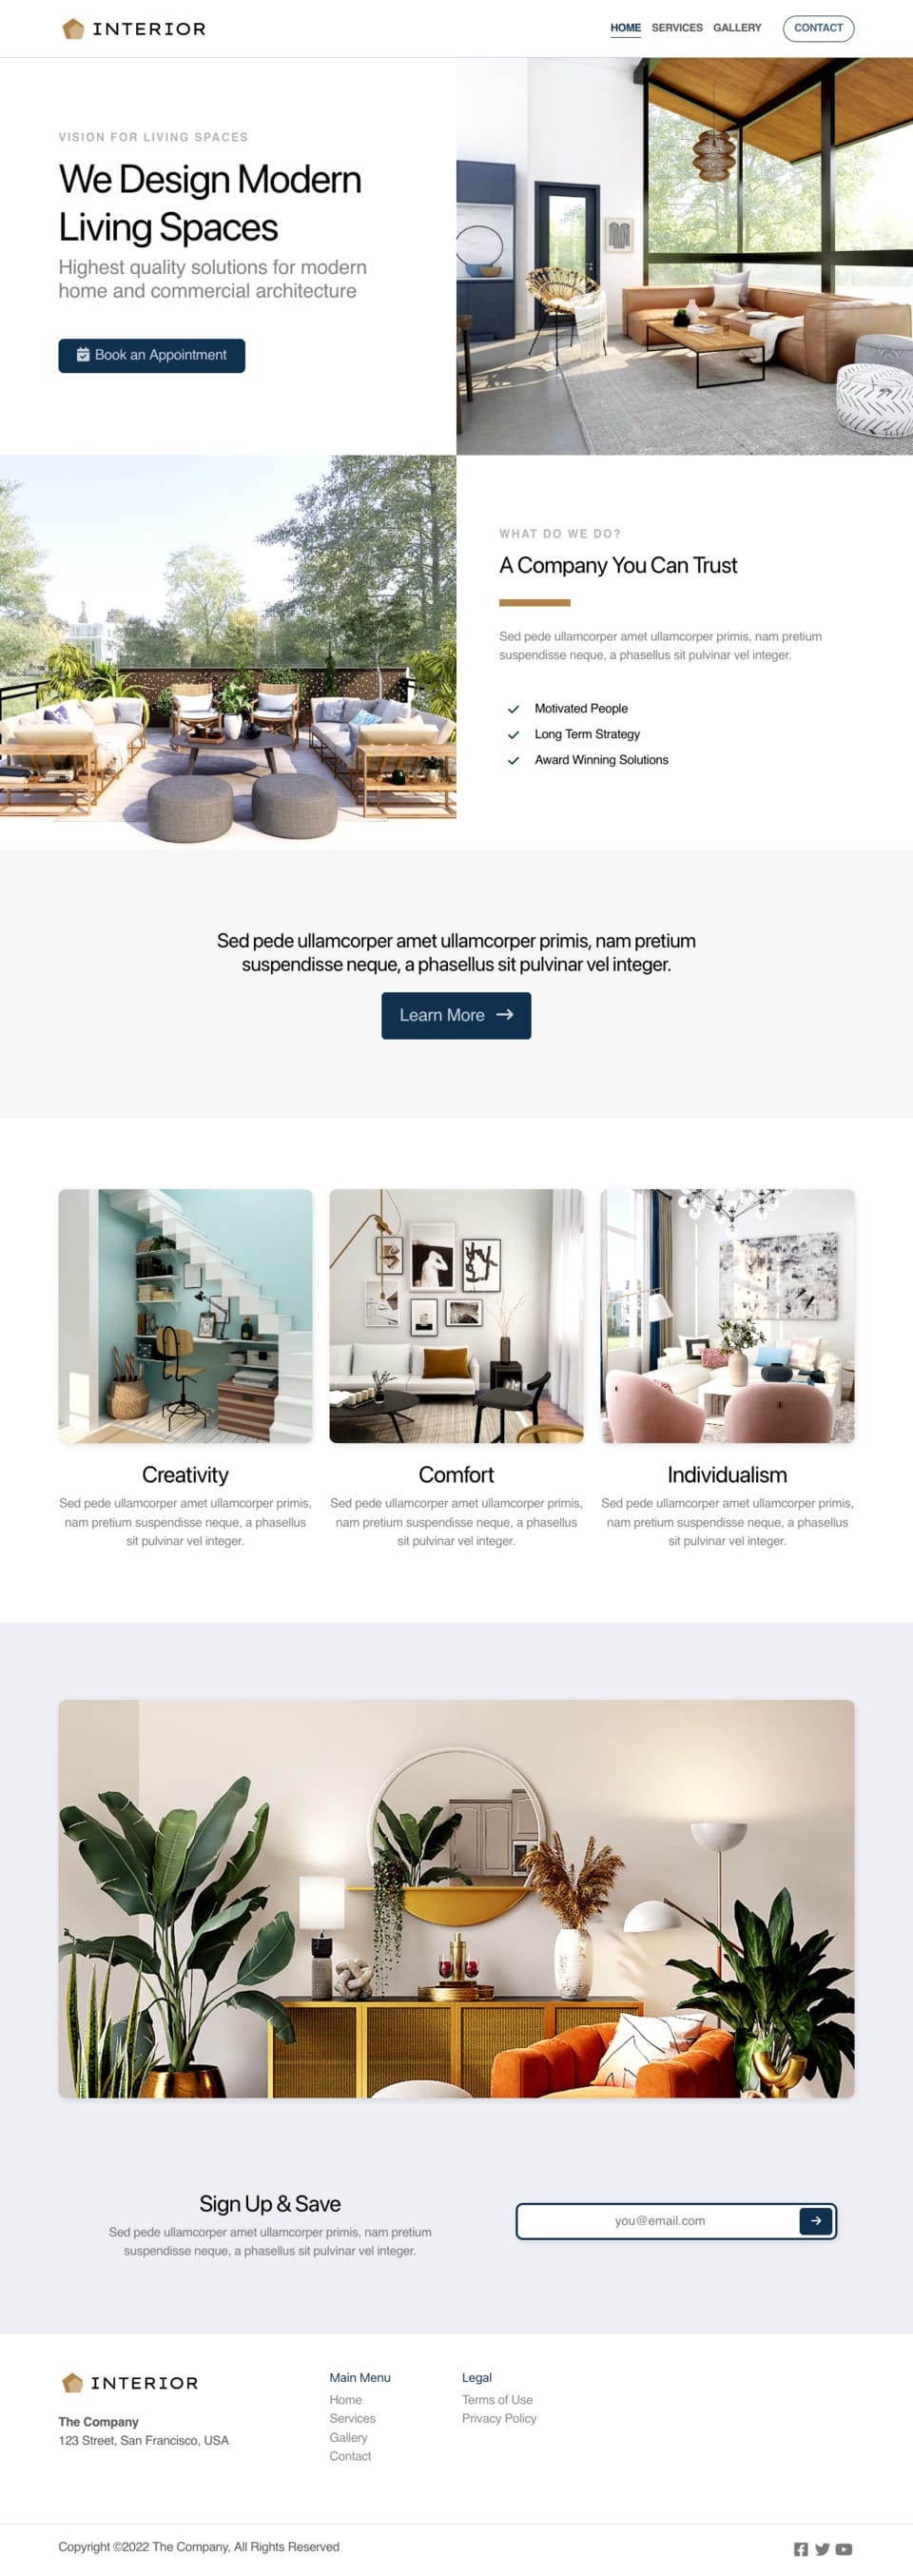 Interior Website Template - Interior Designers, Architects, Apartment Owners, Home Staging Professionals, and Anyone in the Interior Design Industry